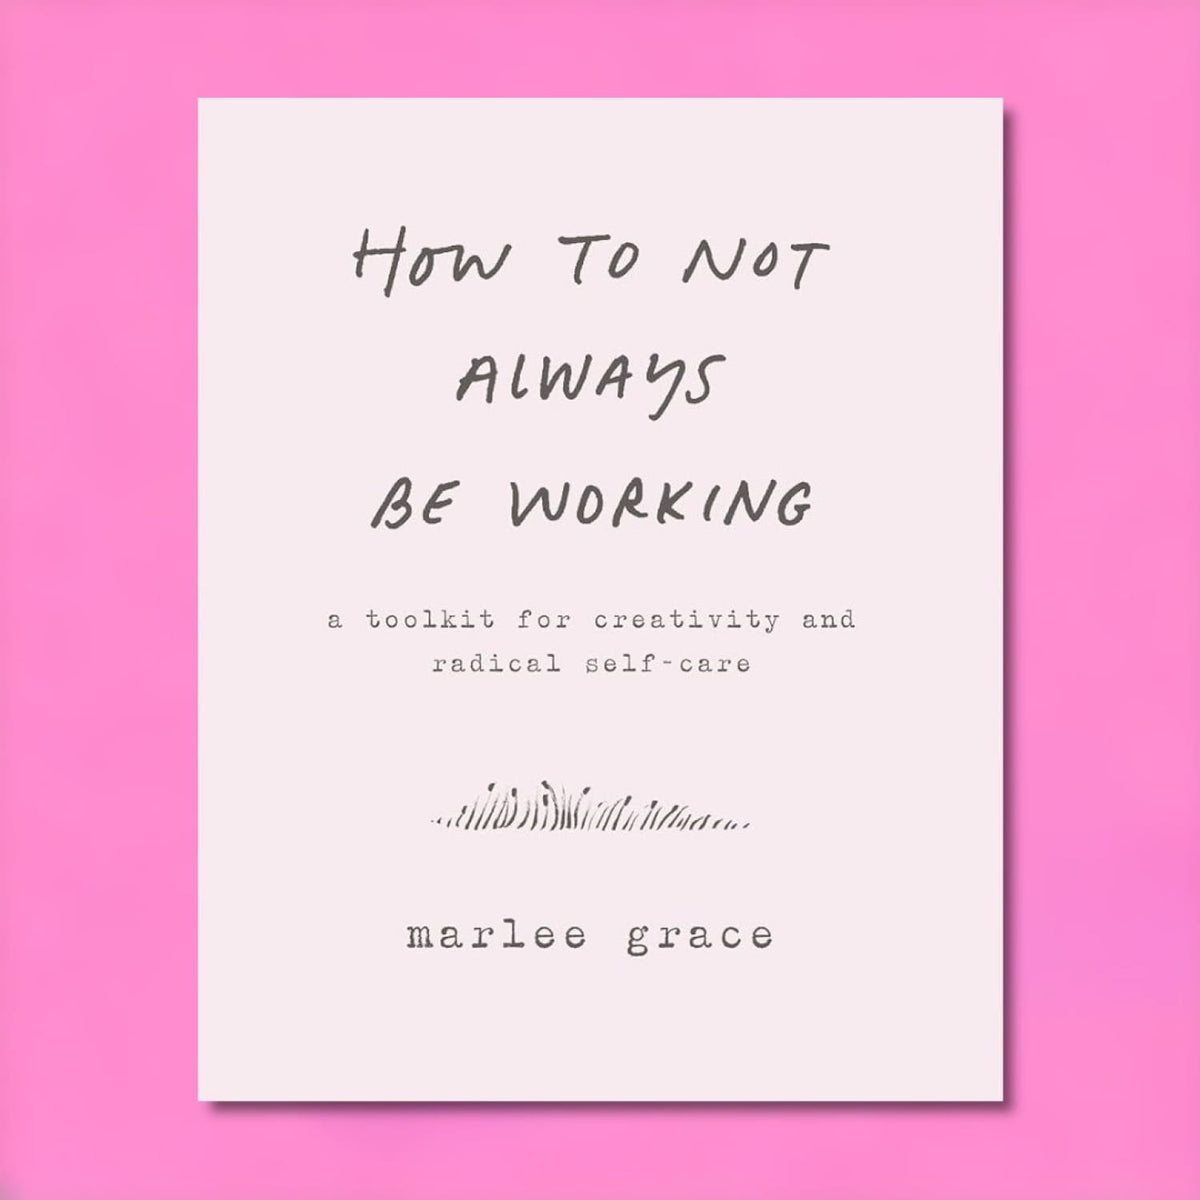 How To Not Always Be Working: a Toolkit For Creativity